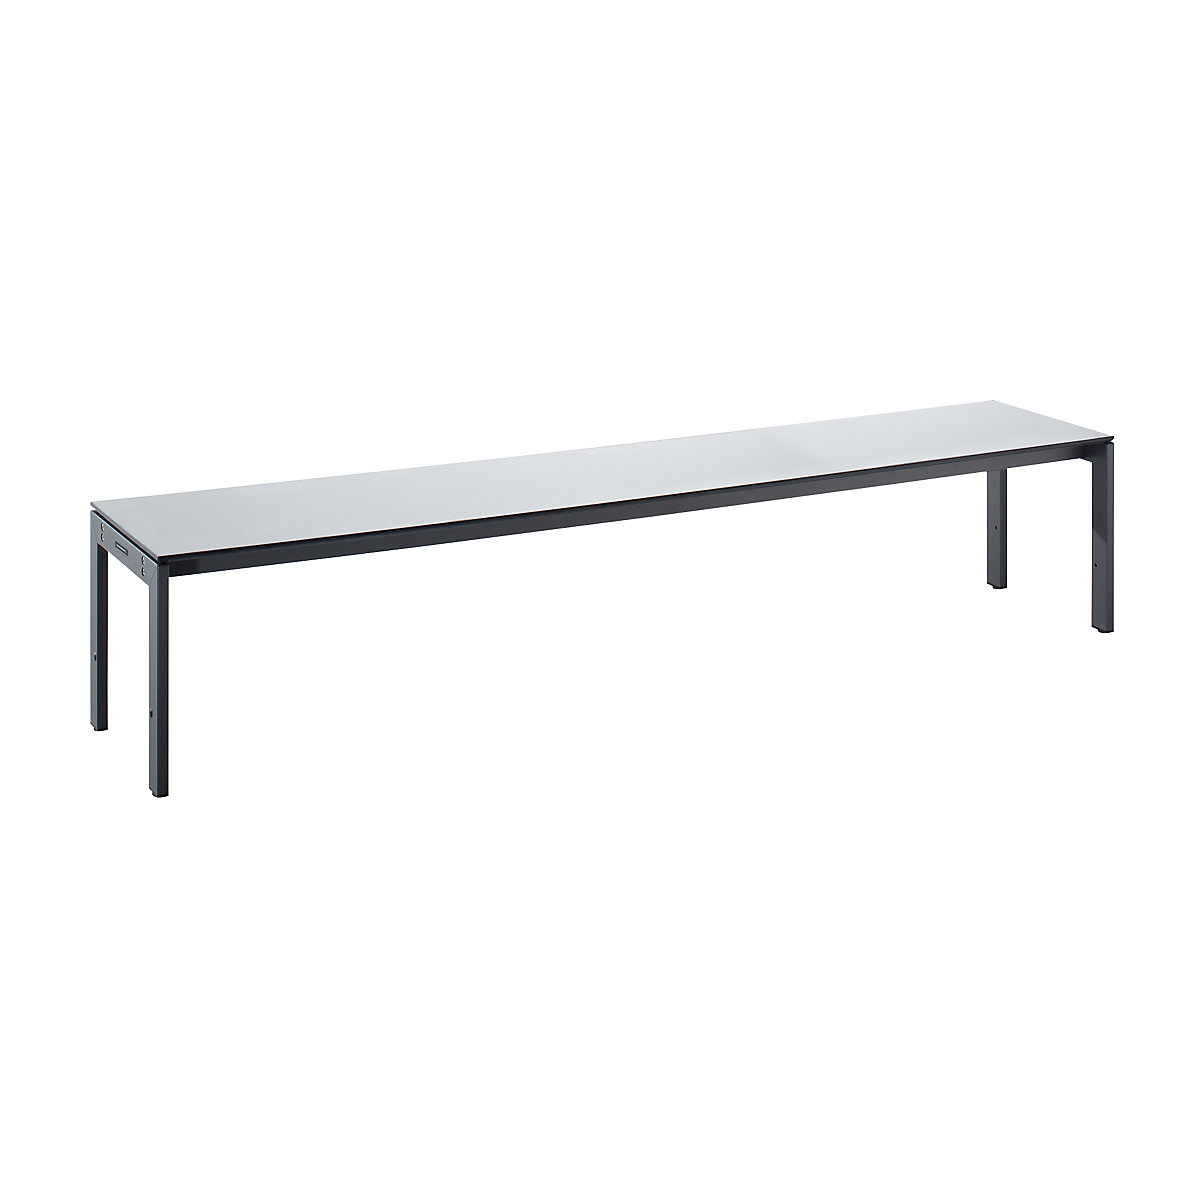 EUROKRAFTpro – Changing room bench with steel frame, LxHxD 2000 x 415 x 400 mm, light grey seat